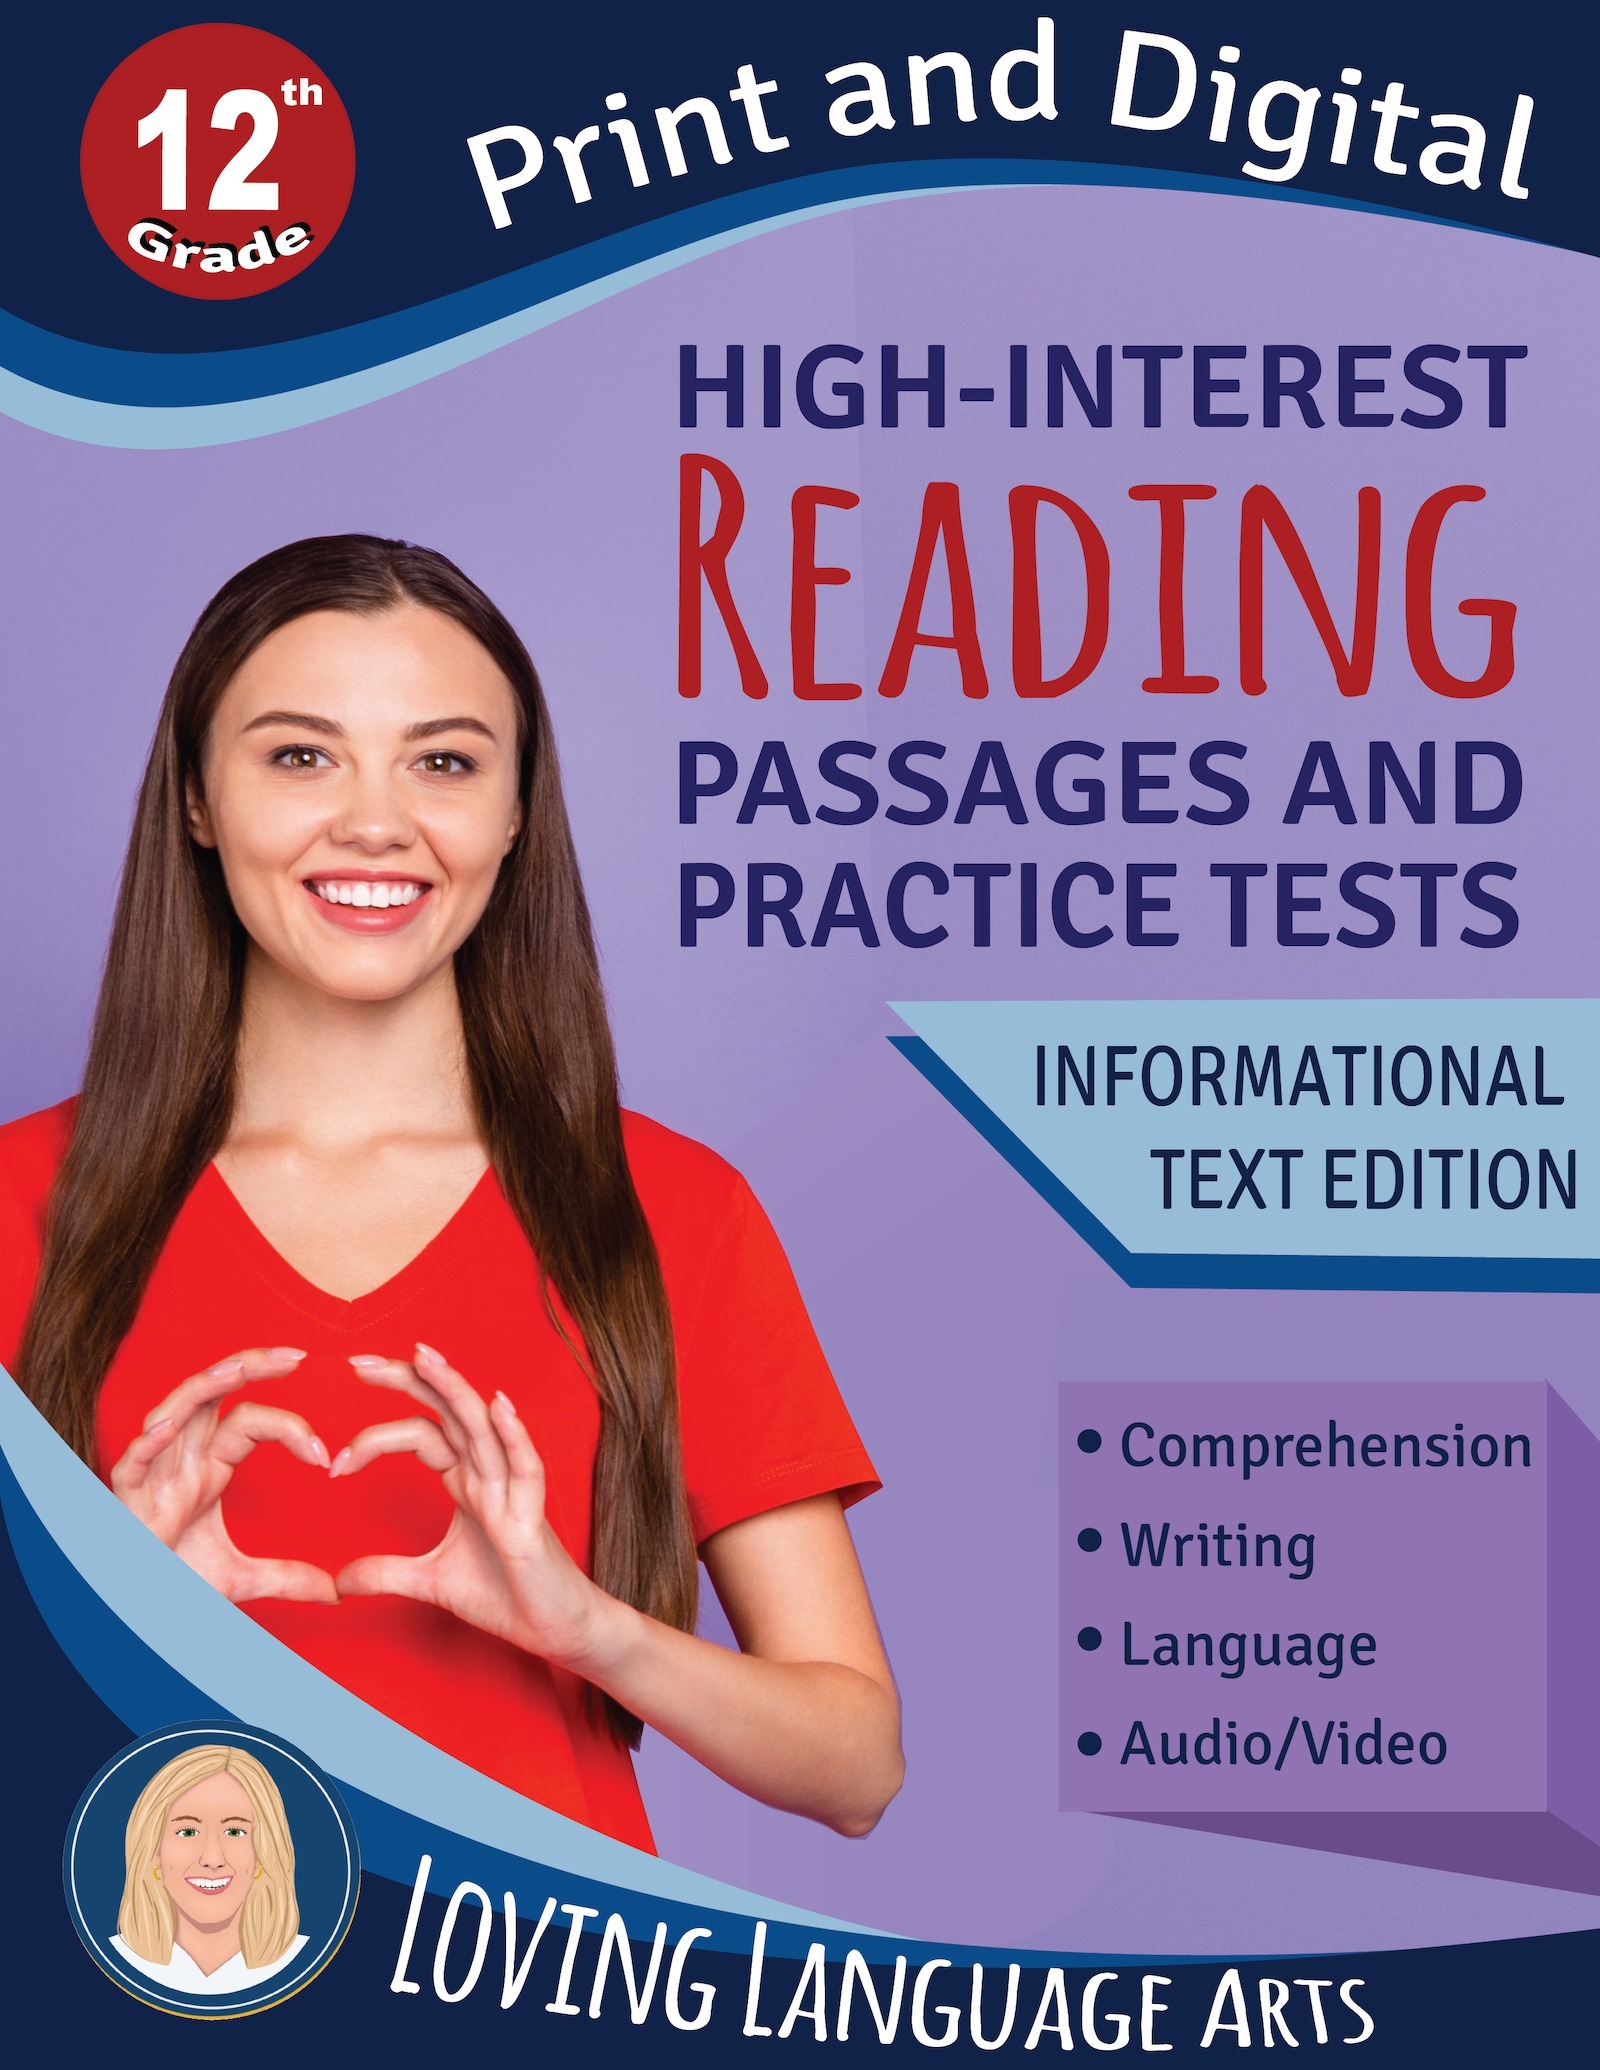 12th grade language arts workbook - High-interest passages and practice tests.